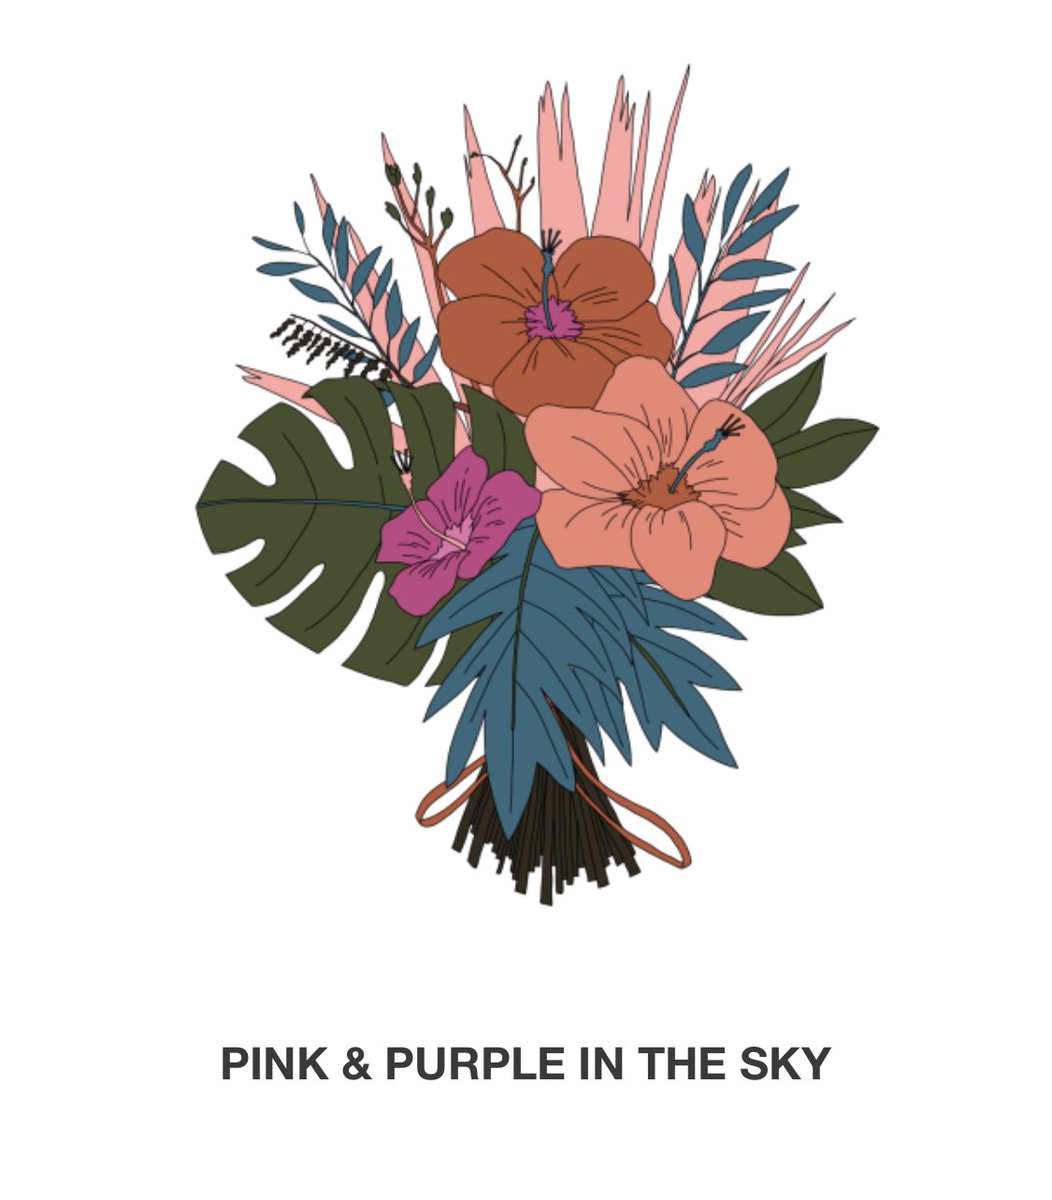 Bouquet: Pink In Purple In The SkySong represents: Harleys In HawaiiLyric: “I’ll be your baby on a sunday”The song was released late 2019, produced by Charlie Puth and John Carlsson and it became a fan favourite.